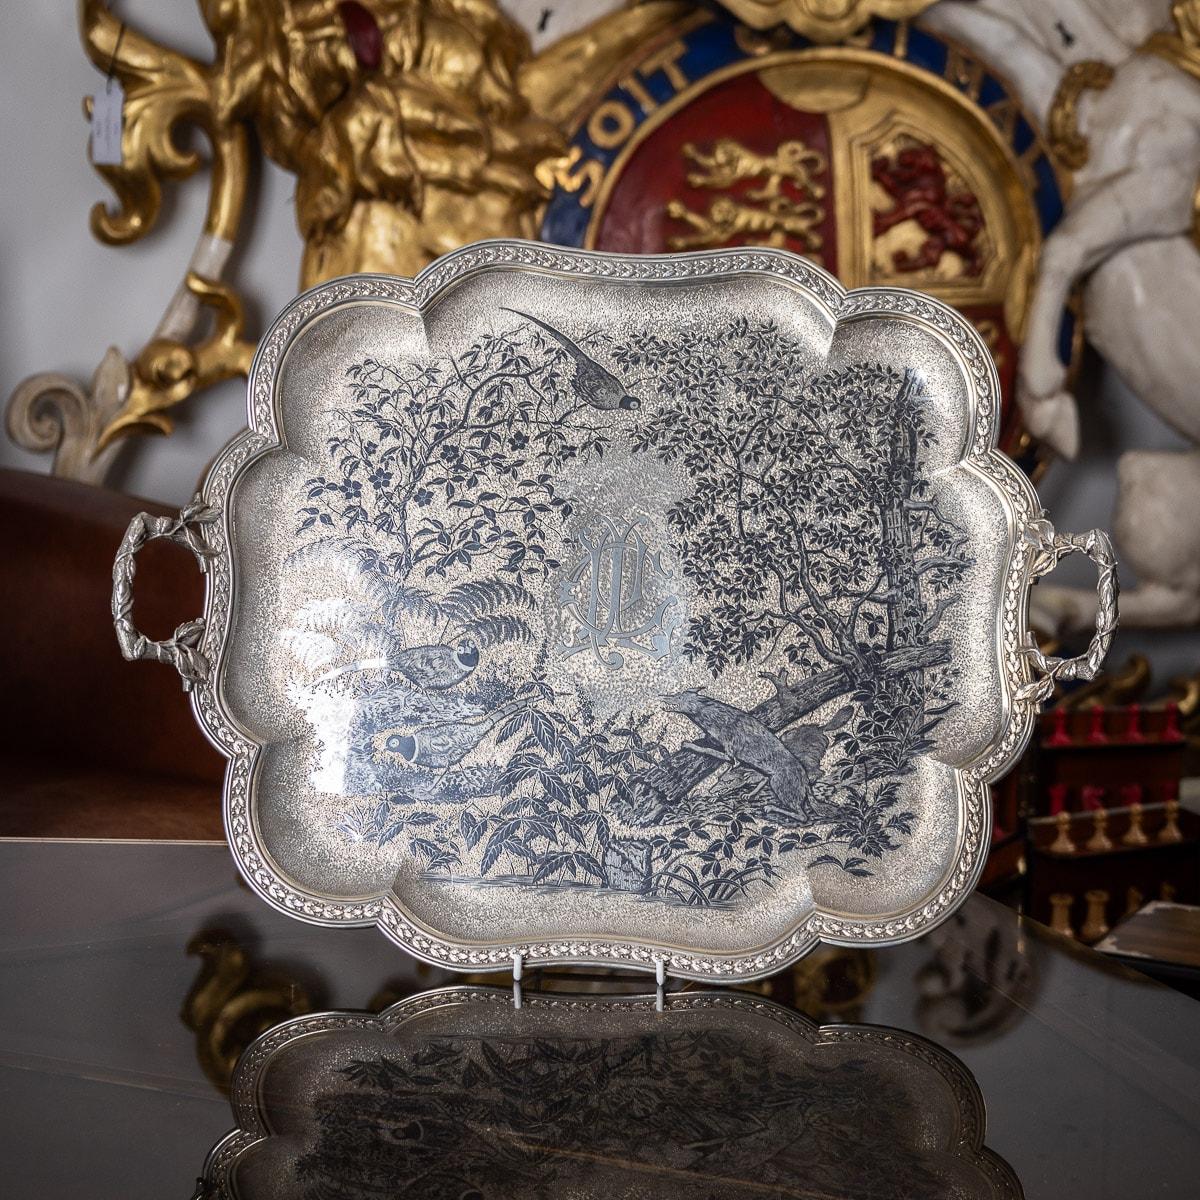 Antique 19th century French very rare and exceptional quality solid silver & niello serving tray, of shaped oblong form, the boarder beautifully decorated with laurel leaves and applied with realistically modeled branch handles, the center engraved